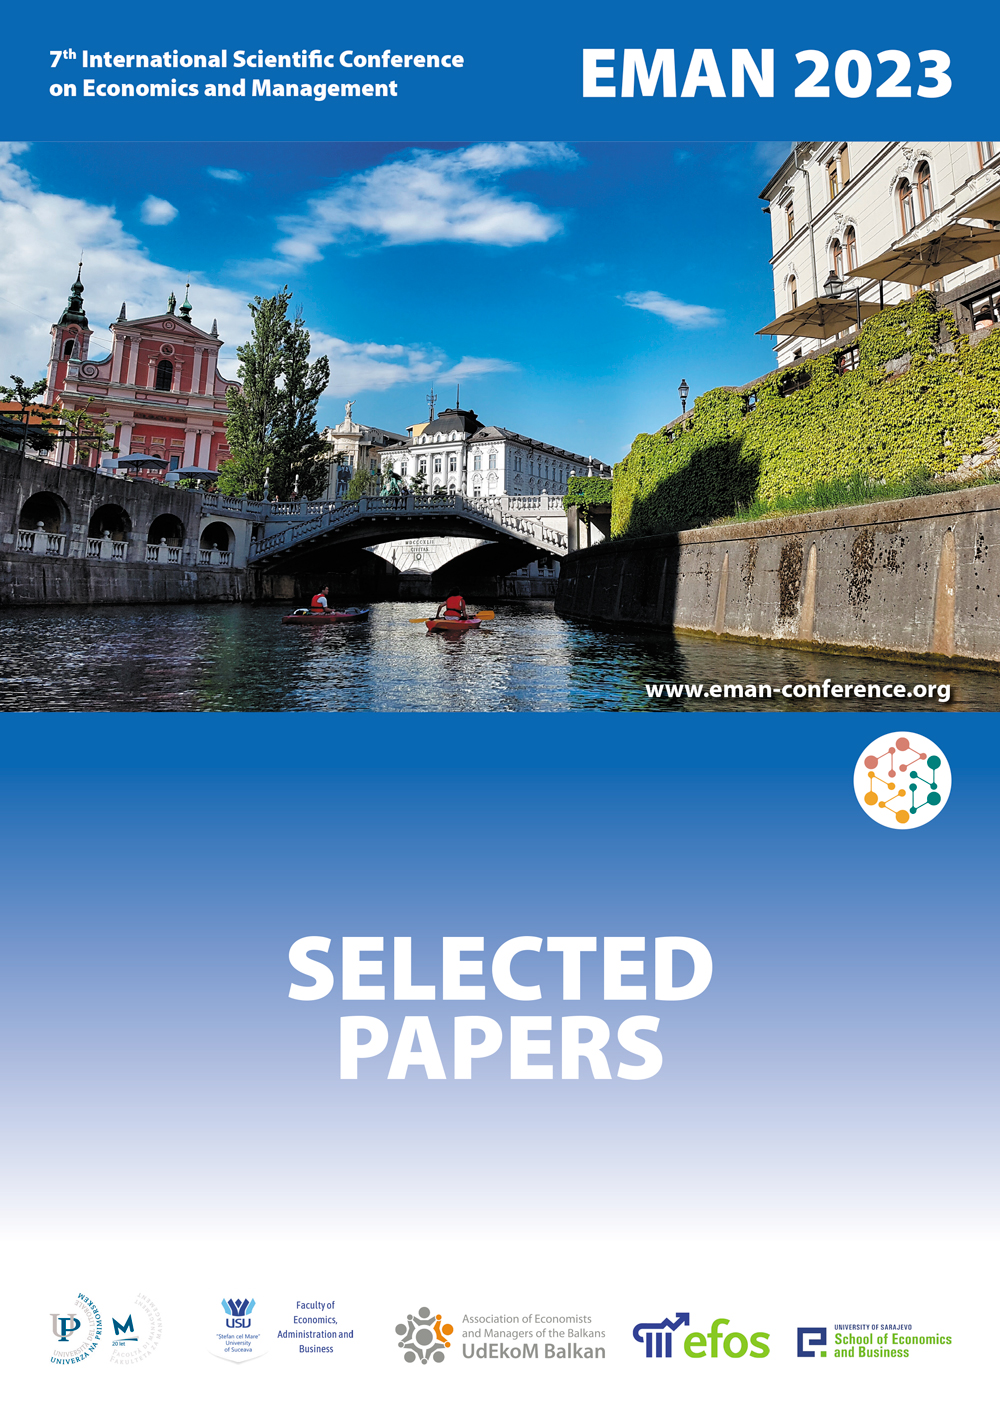 7th International Scientific Conference EMAN 2023 – Economics & Management: How to Cope with Disrupted Times, SELECTED PAPERS, Ljubljana, Slovenia (hybrid), March 23, 2023